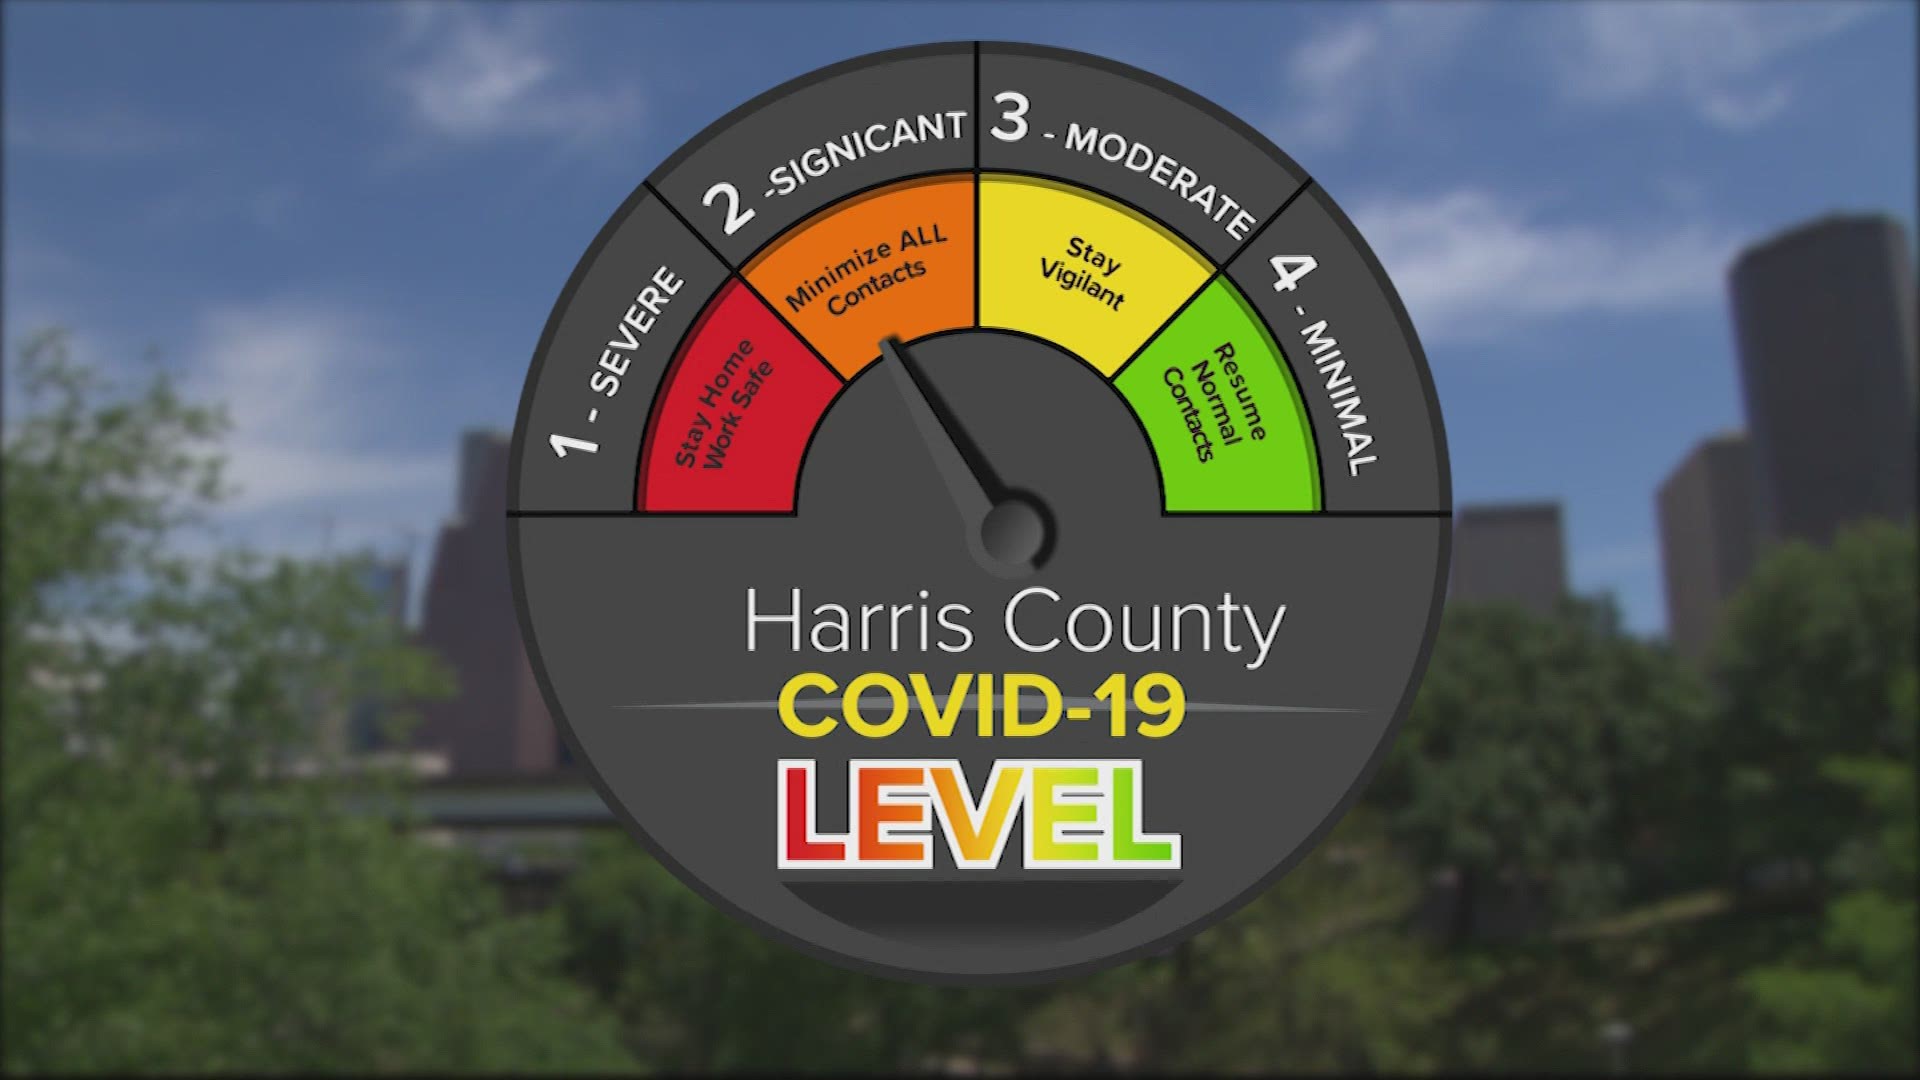 Judge Lina Hidalgo confirmed the COVID-19 threat level in Harris County has been lowered from the highest alert— it's now at threat Level 2/Orange.